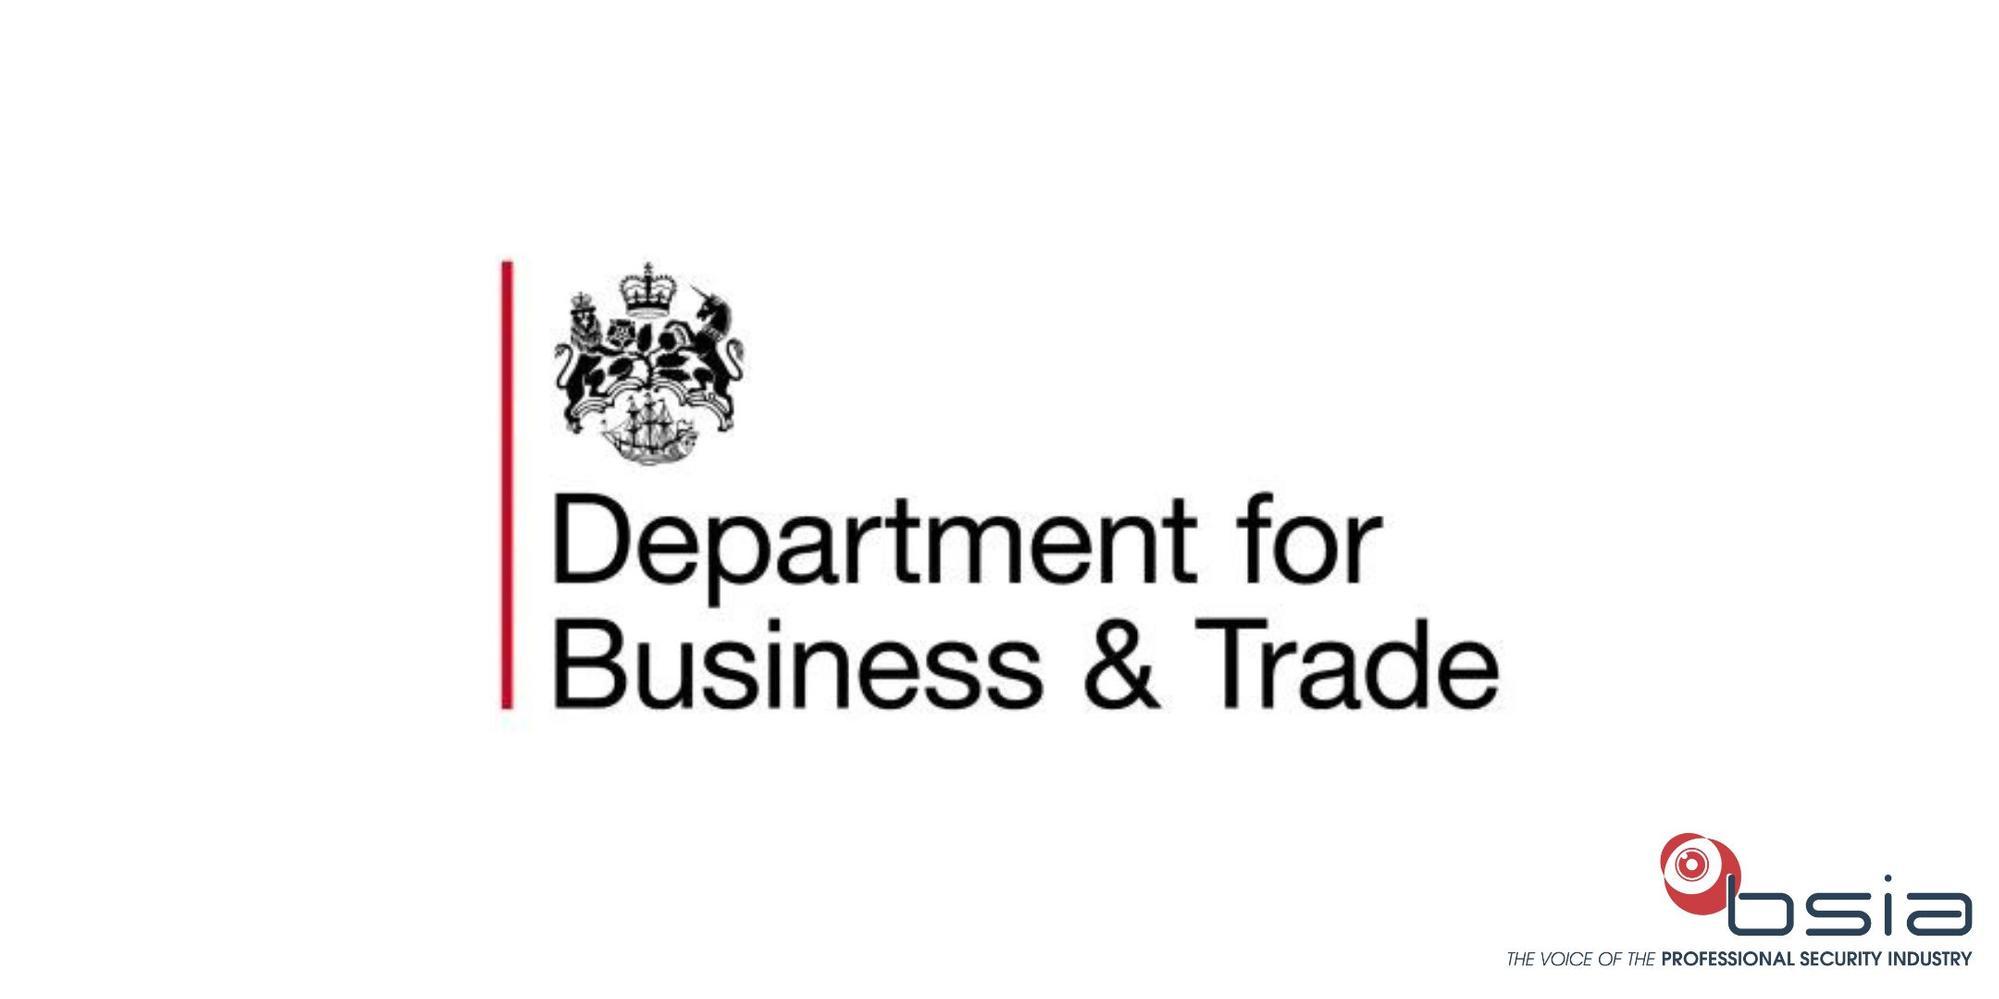 British Security Industry Association Applauds Extension of CE Marking